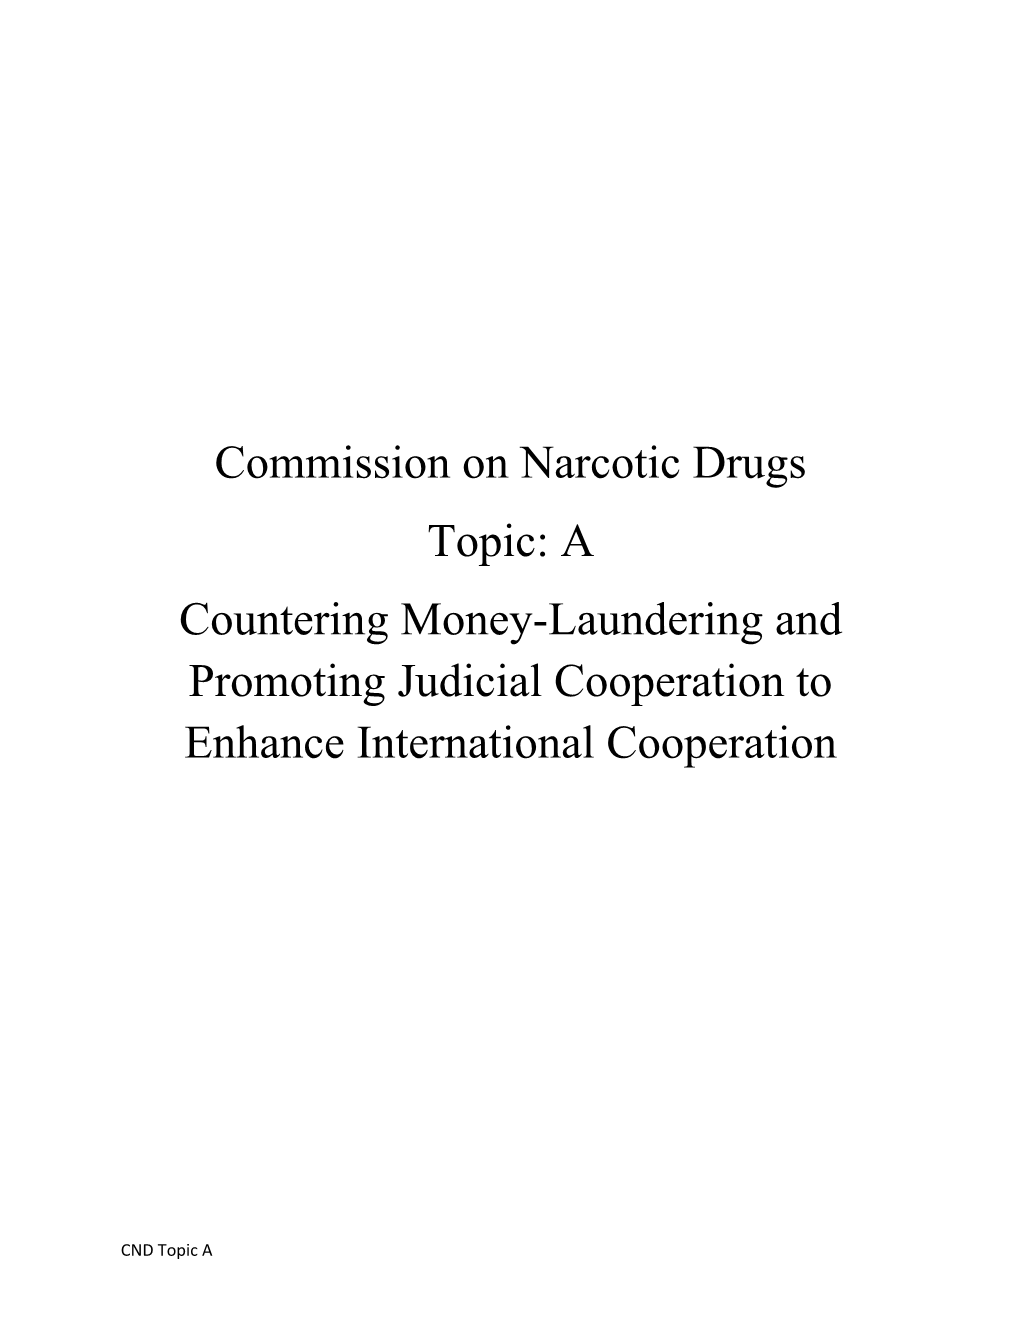 Countering Money-Laundering and Promoting Judicial Cooperation to Enhance International